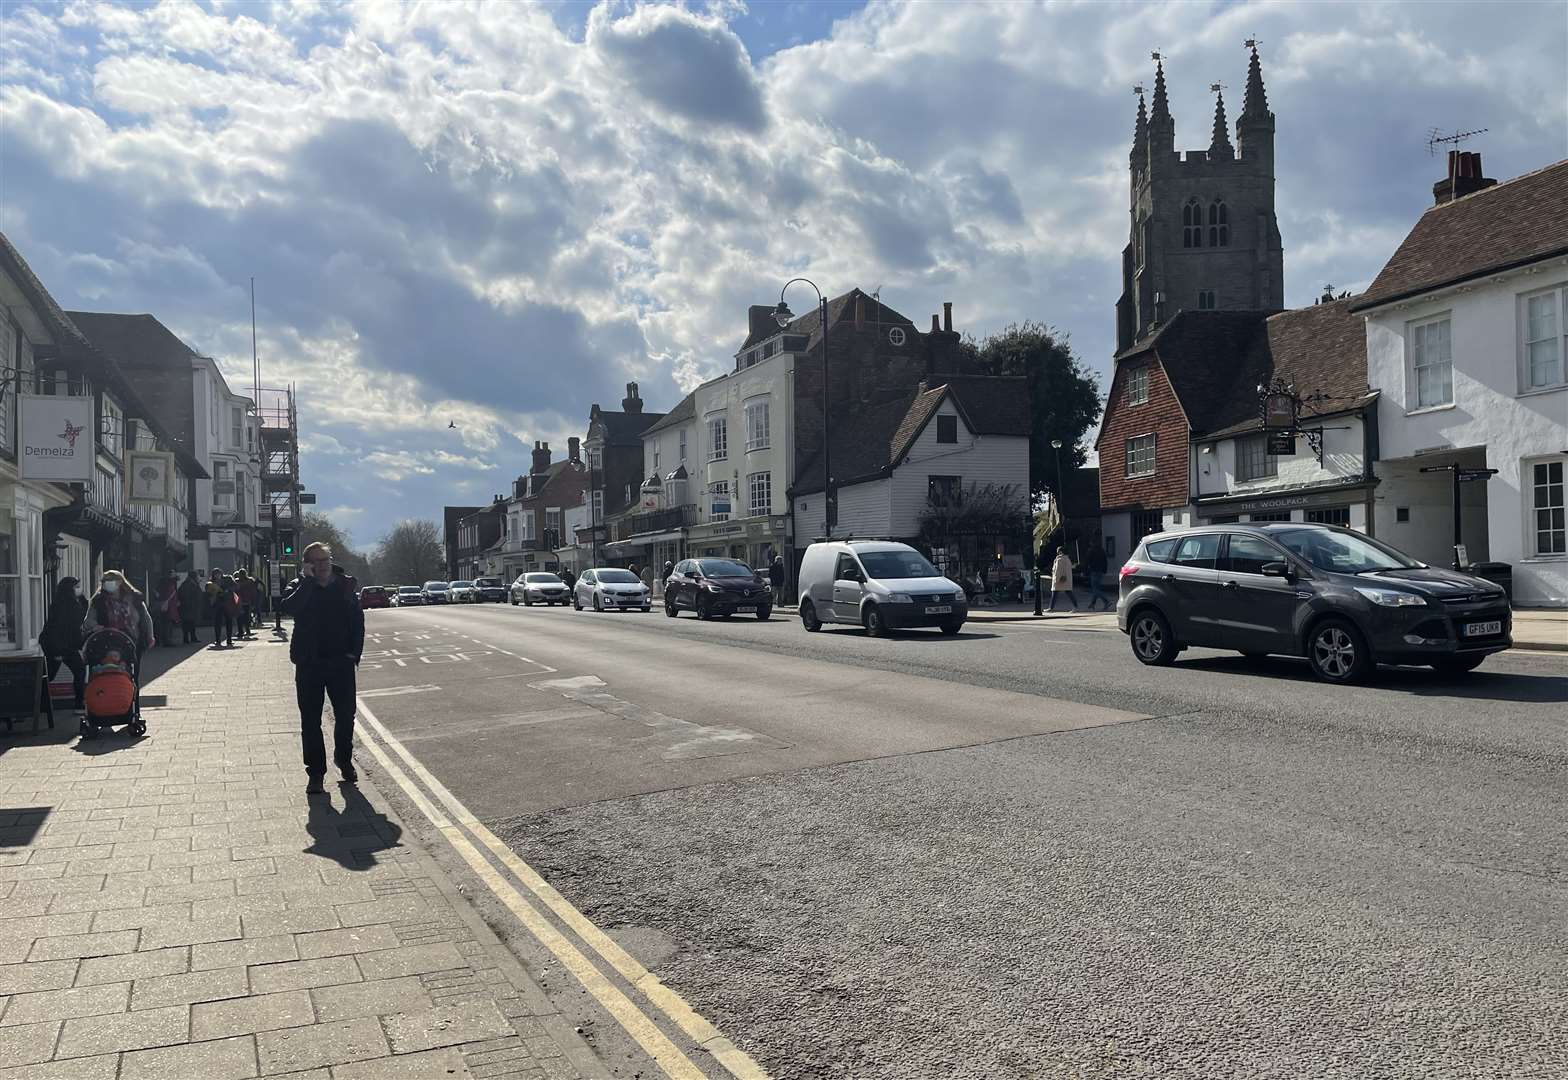 Campaigners want a 20mph limit in Tenterden